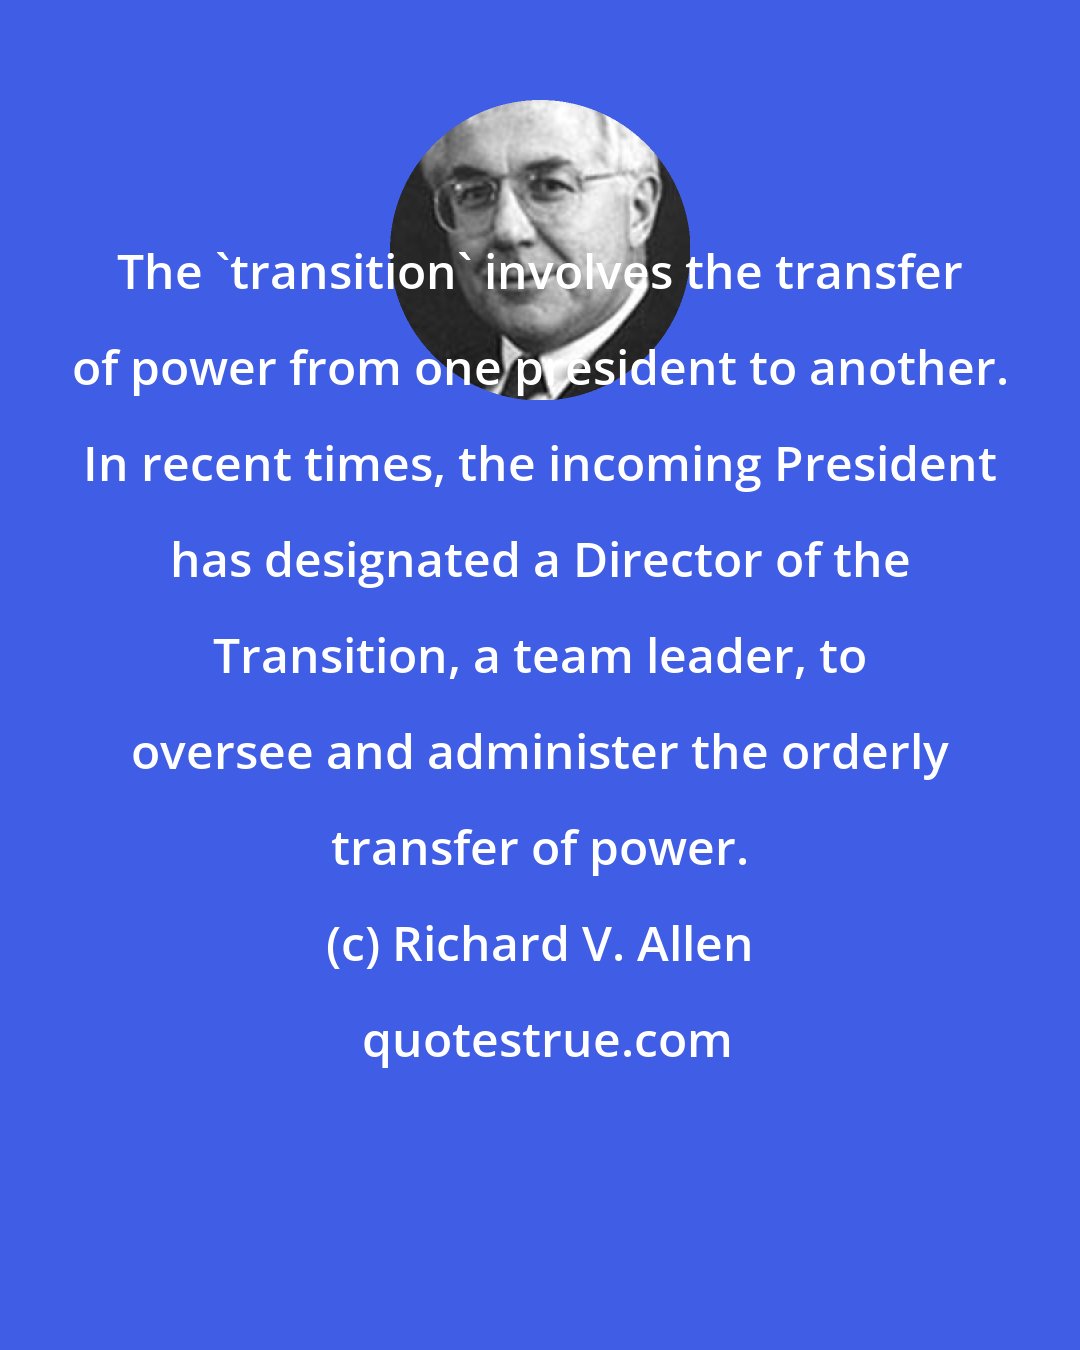 Richard V. Allen: The 'transition' involves the transfer of power from one president to another. In recent times, the incoming President has designated a Director of the Transition, a team leader, to oversee and administer the orderly transfer of power.